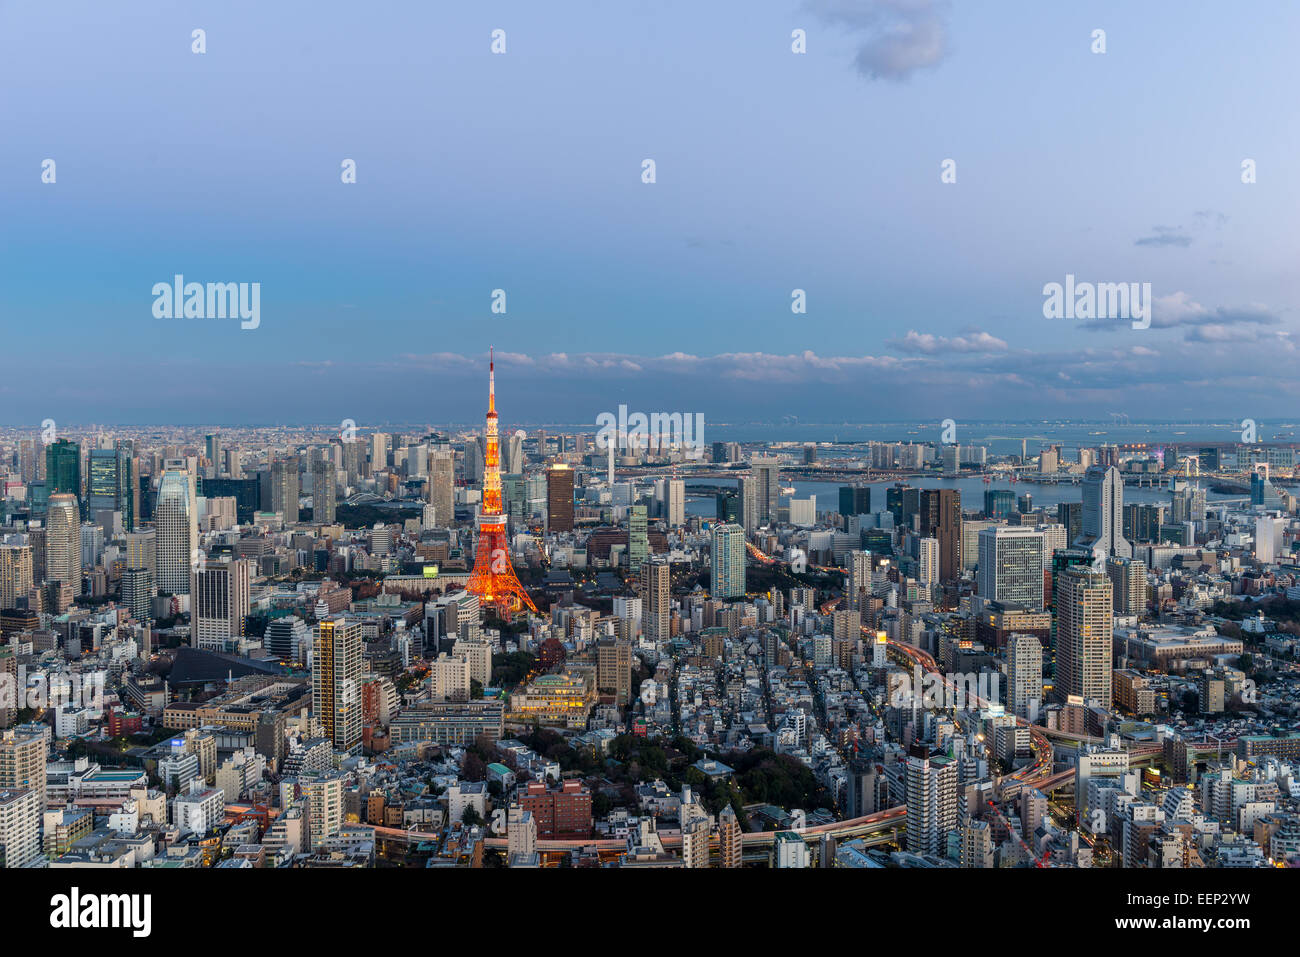 Tokyo Tower stands out among the Tokyo cityscape as evening approaches. Stock Photo